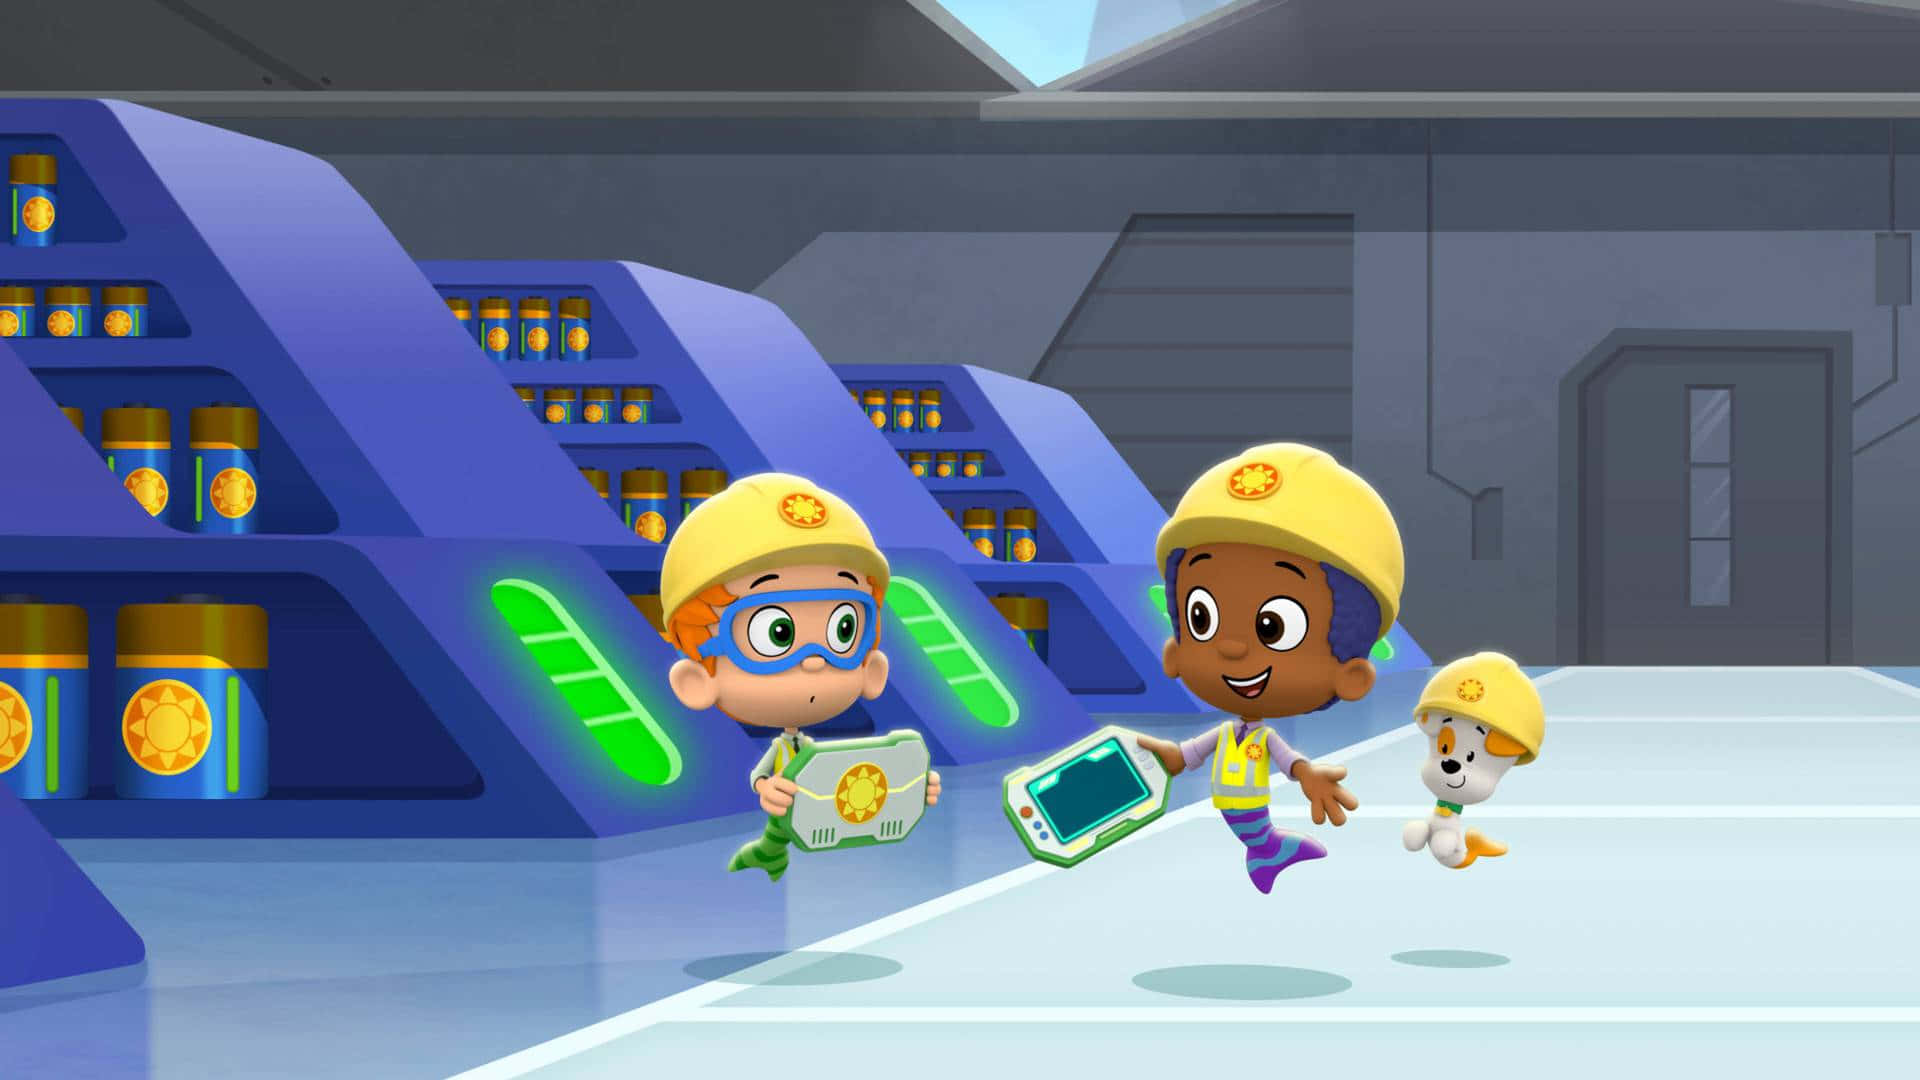 Dive into the colorful world of Bubble Guppies.